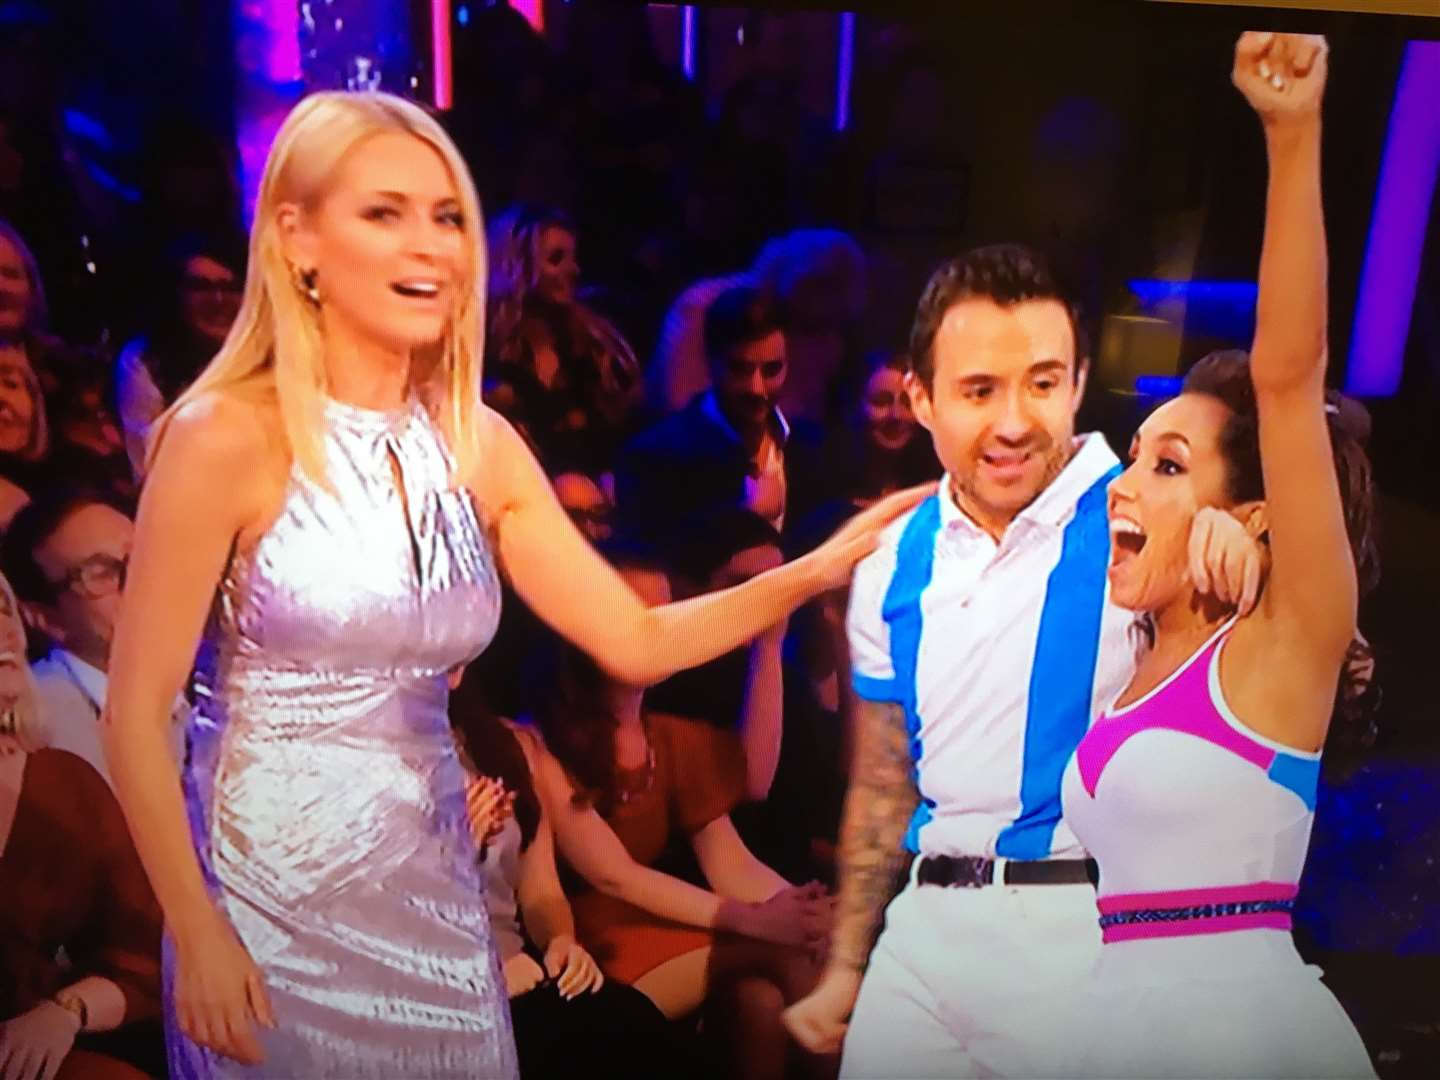 Tunbridge Wells table tennis player Will Bayley celebrating on BBC One's Strictly Come Dancing with Tess Daly